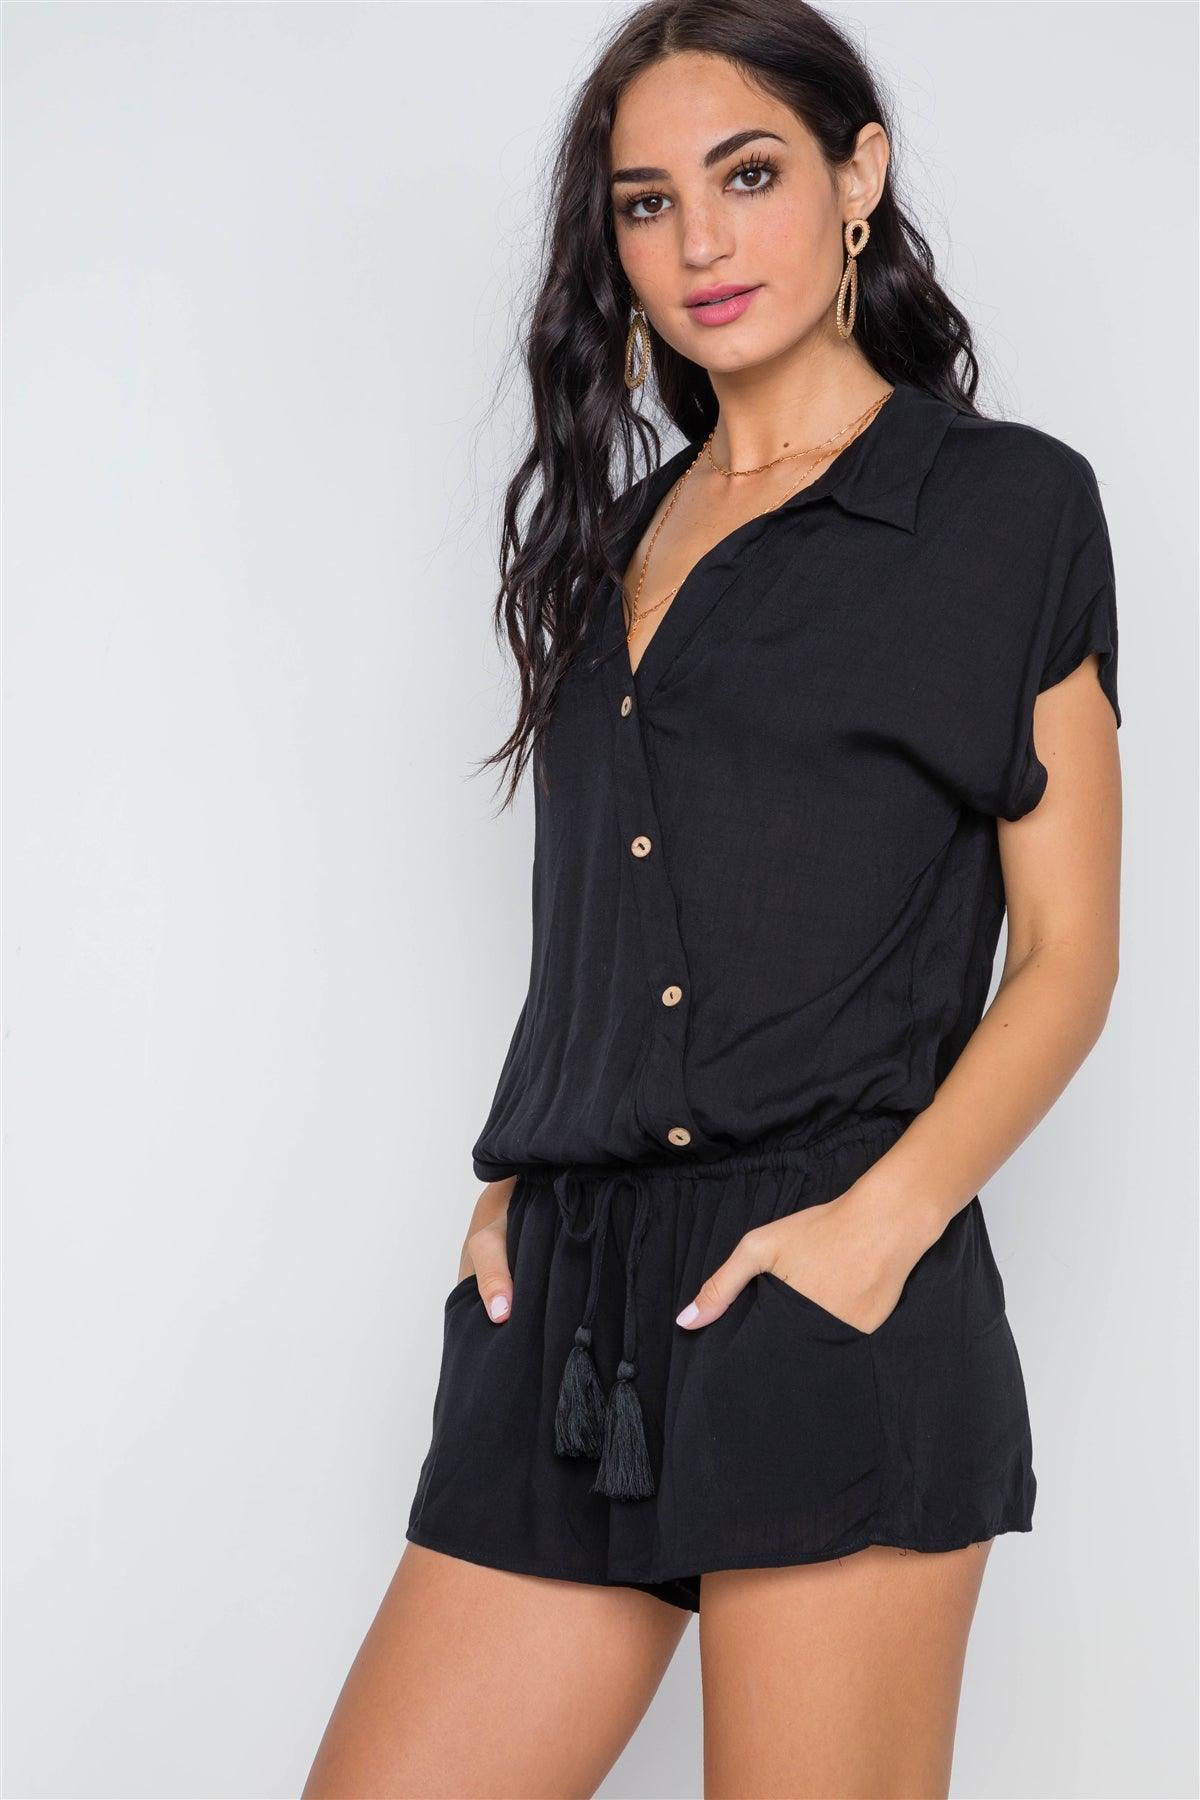 Black Short Sleeve Relaxed Fit Romper /3-2-1